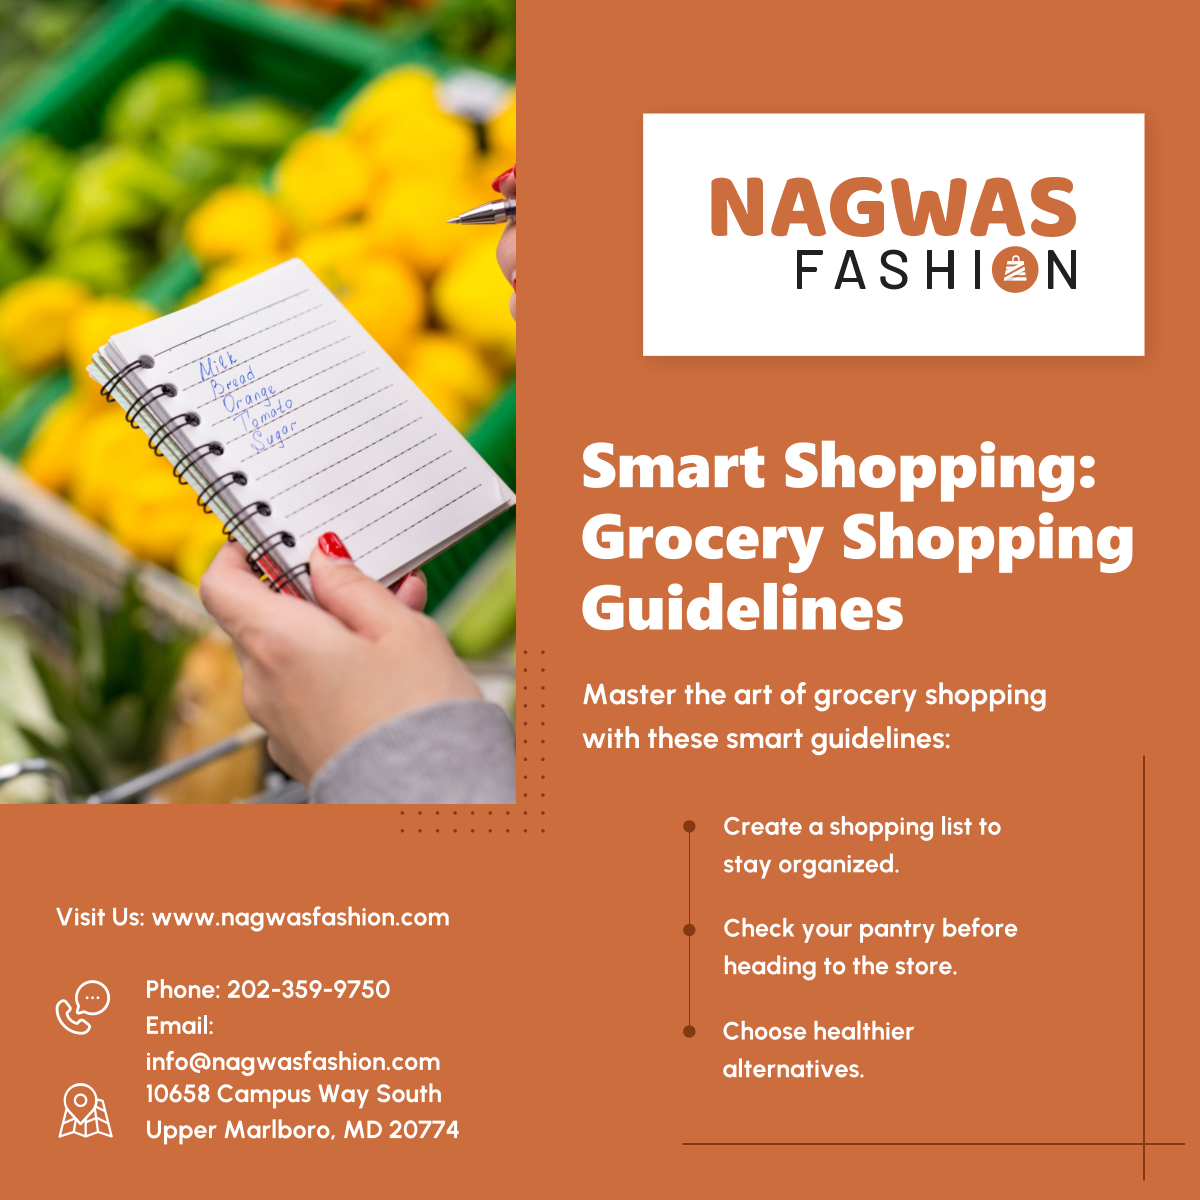 Save time and money while making healthier choices with our grocery shopping guidelines. Discover more insights on our blog. 

#GroceryShopping #SmartShopping #UpperMarlboroMD #ECommerce #NAGWASFashion